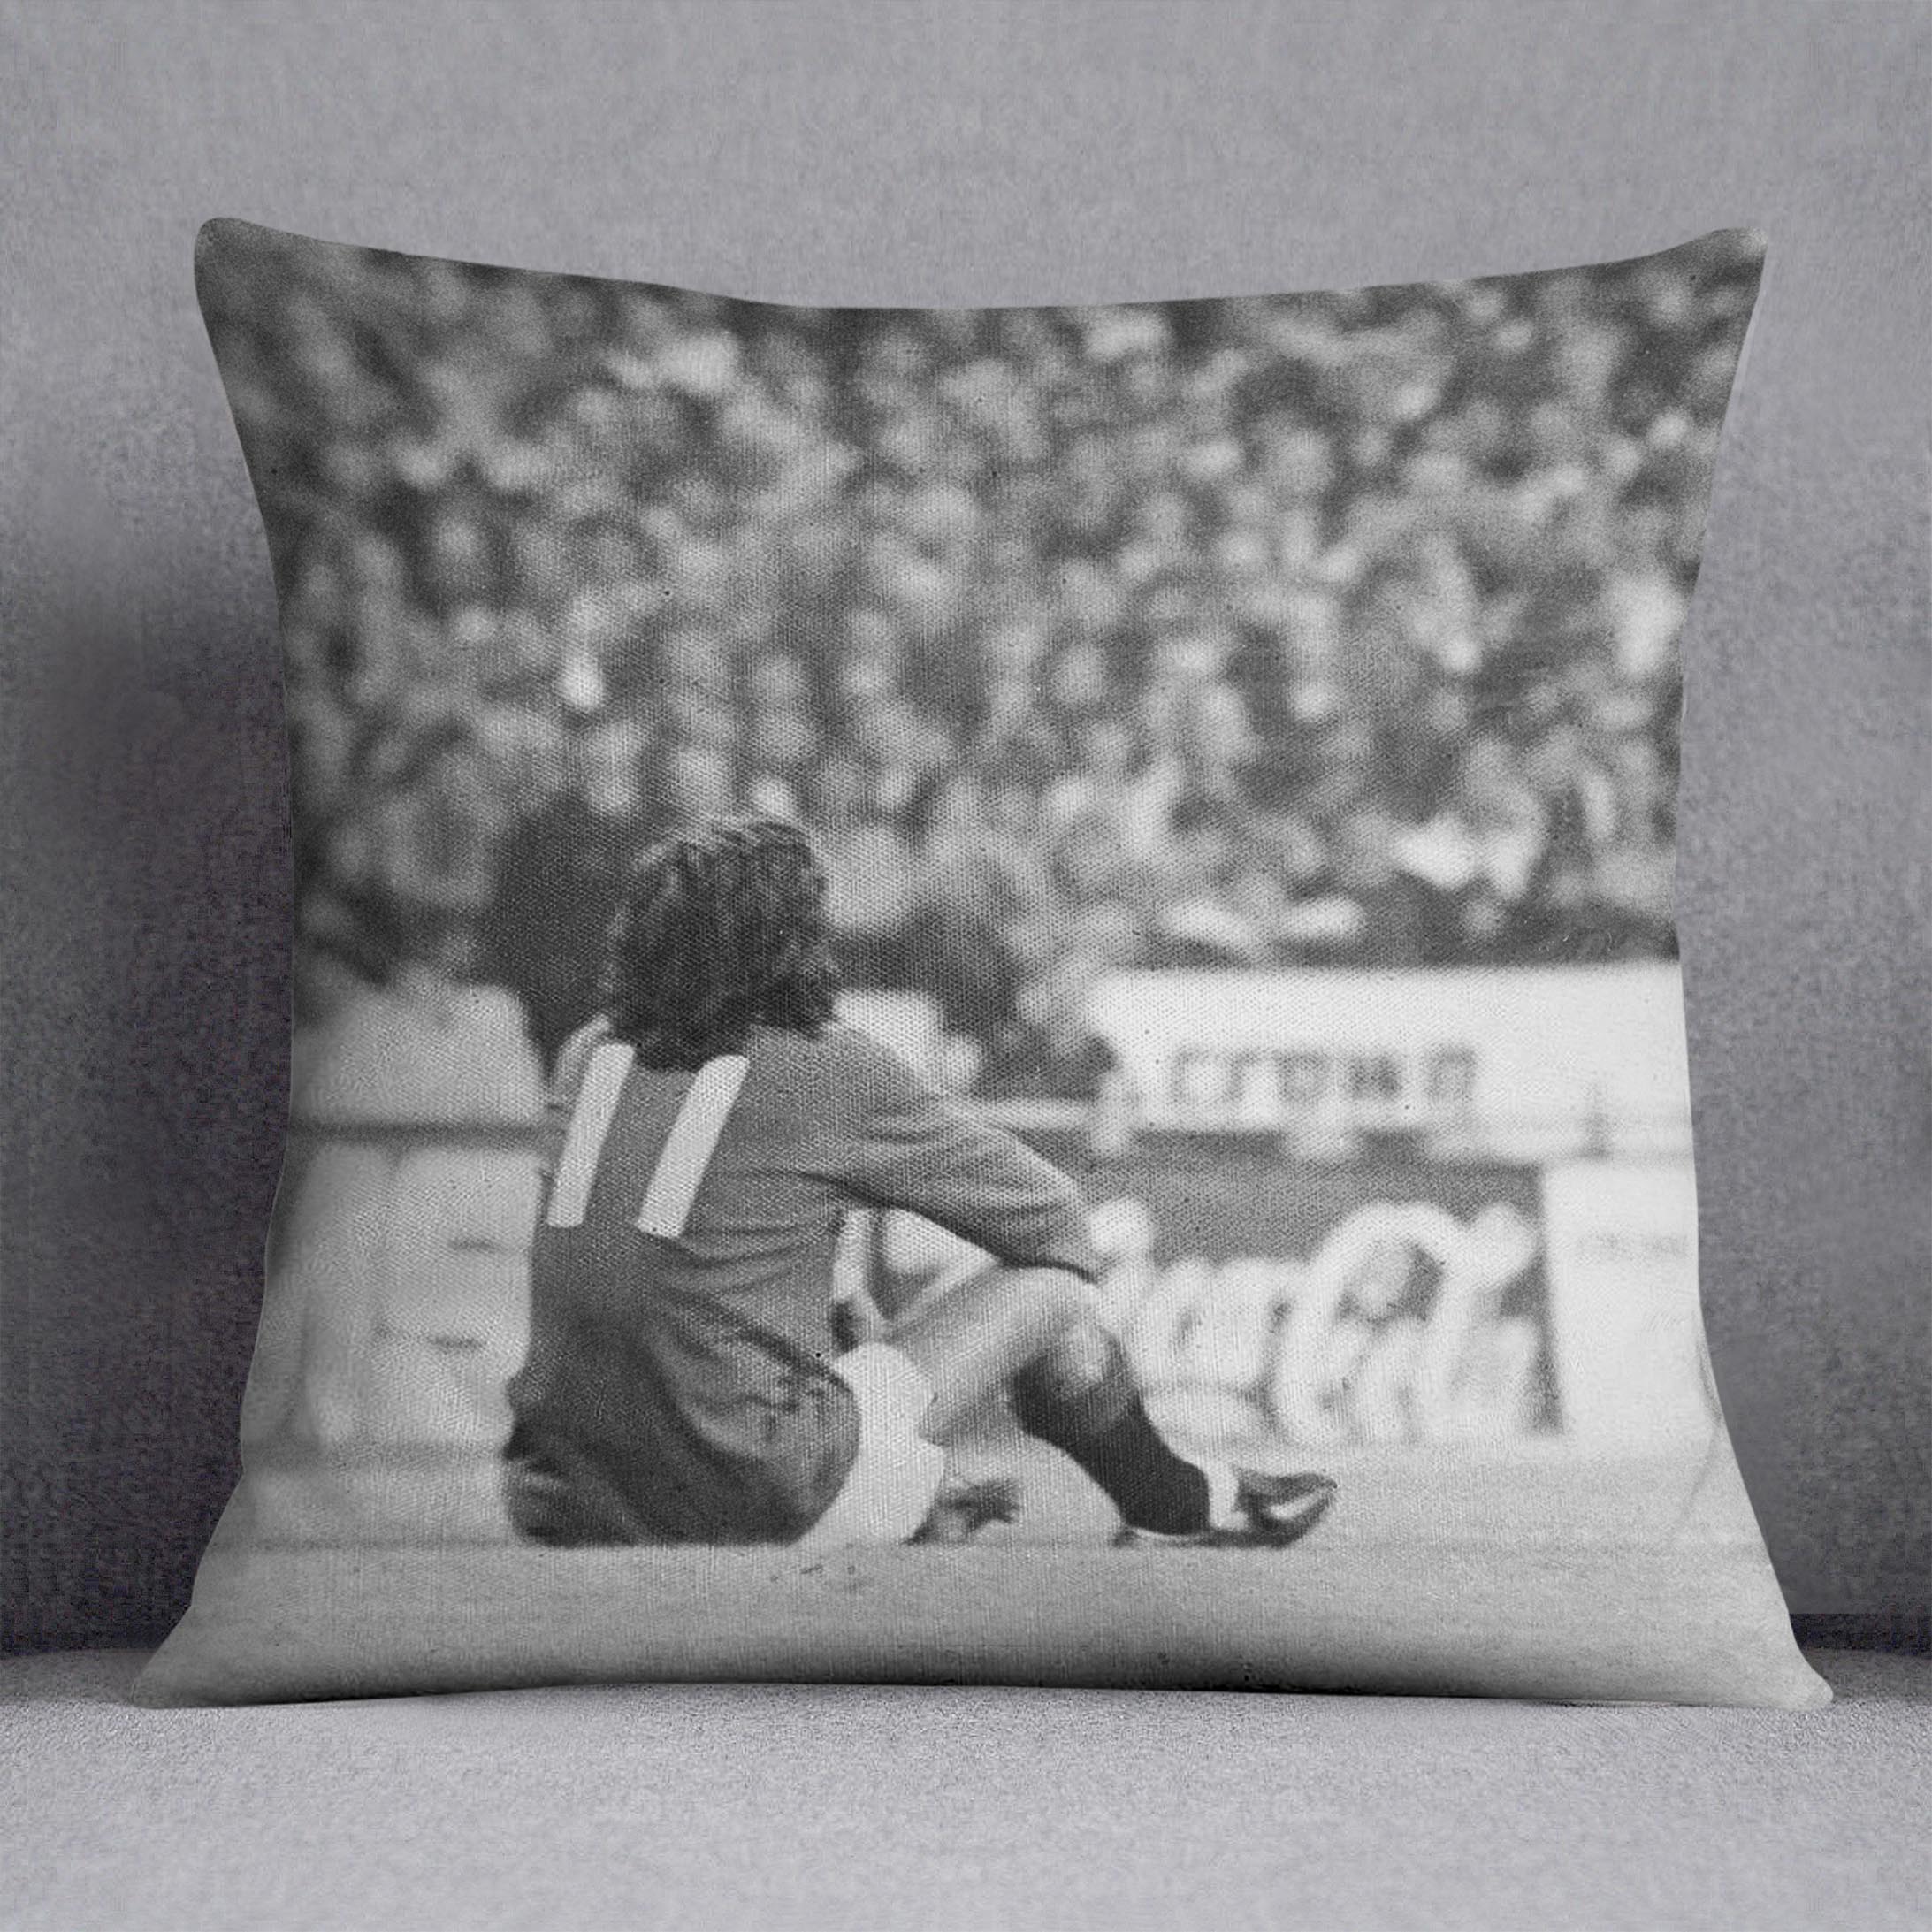 George Best Protest Cushion